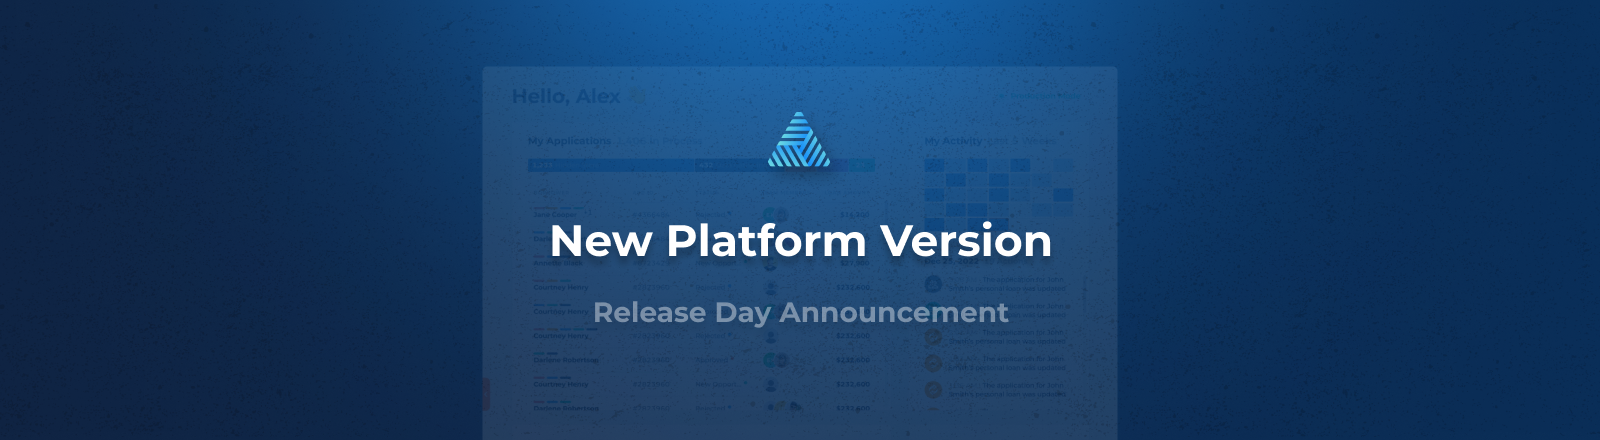 Get Ready: New Platform Version Launching on April 3rd!